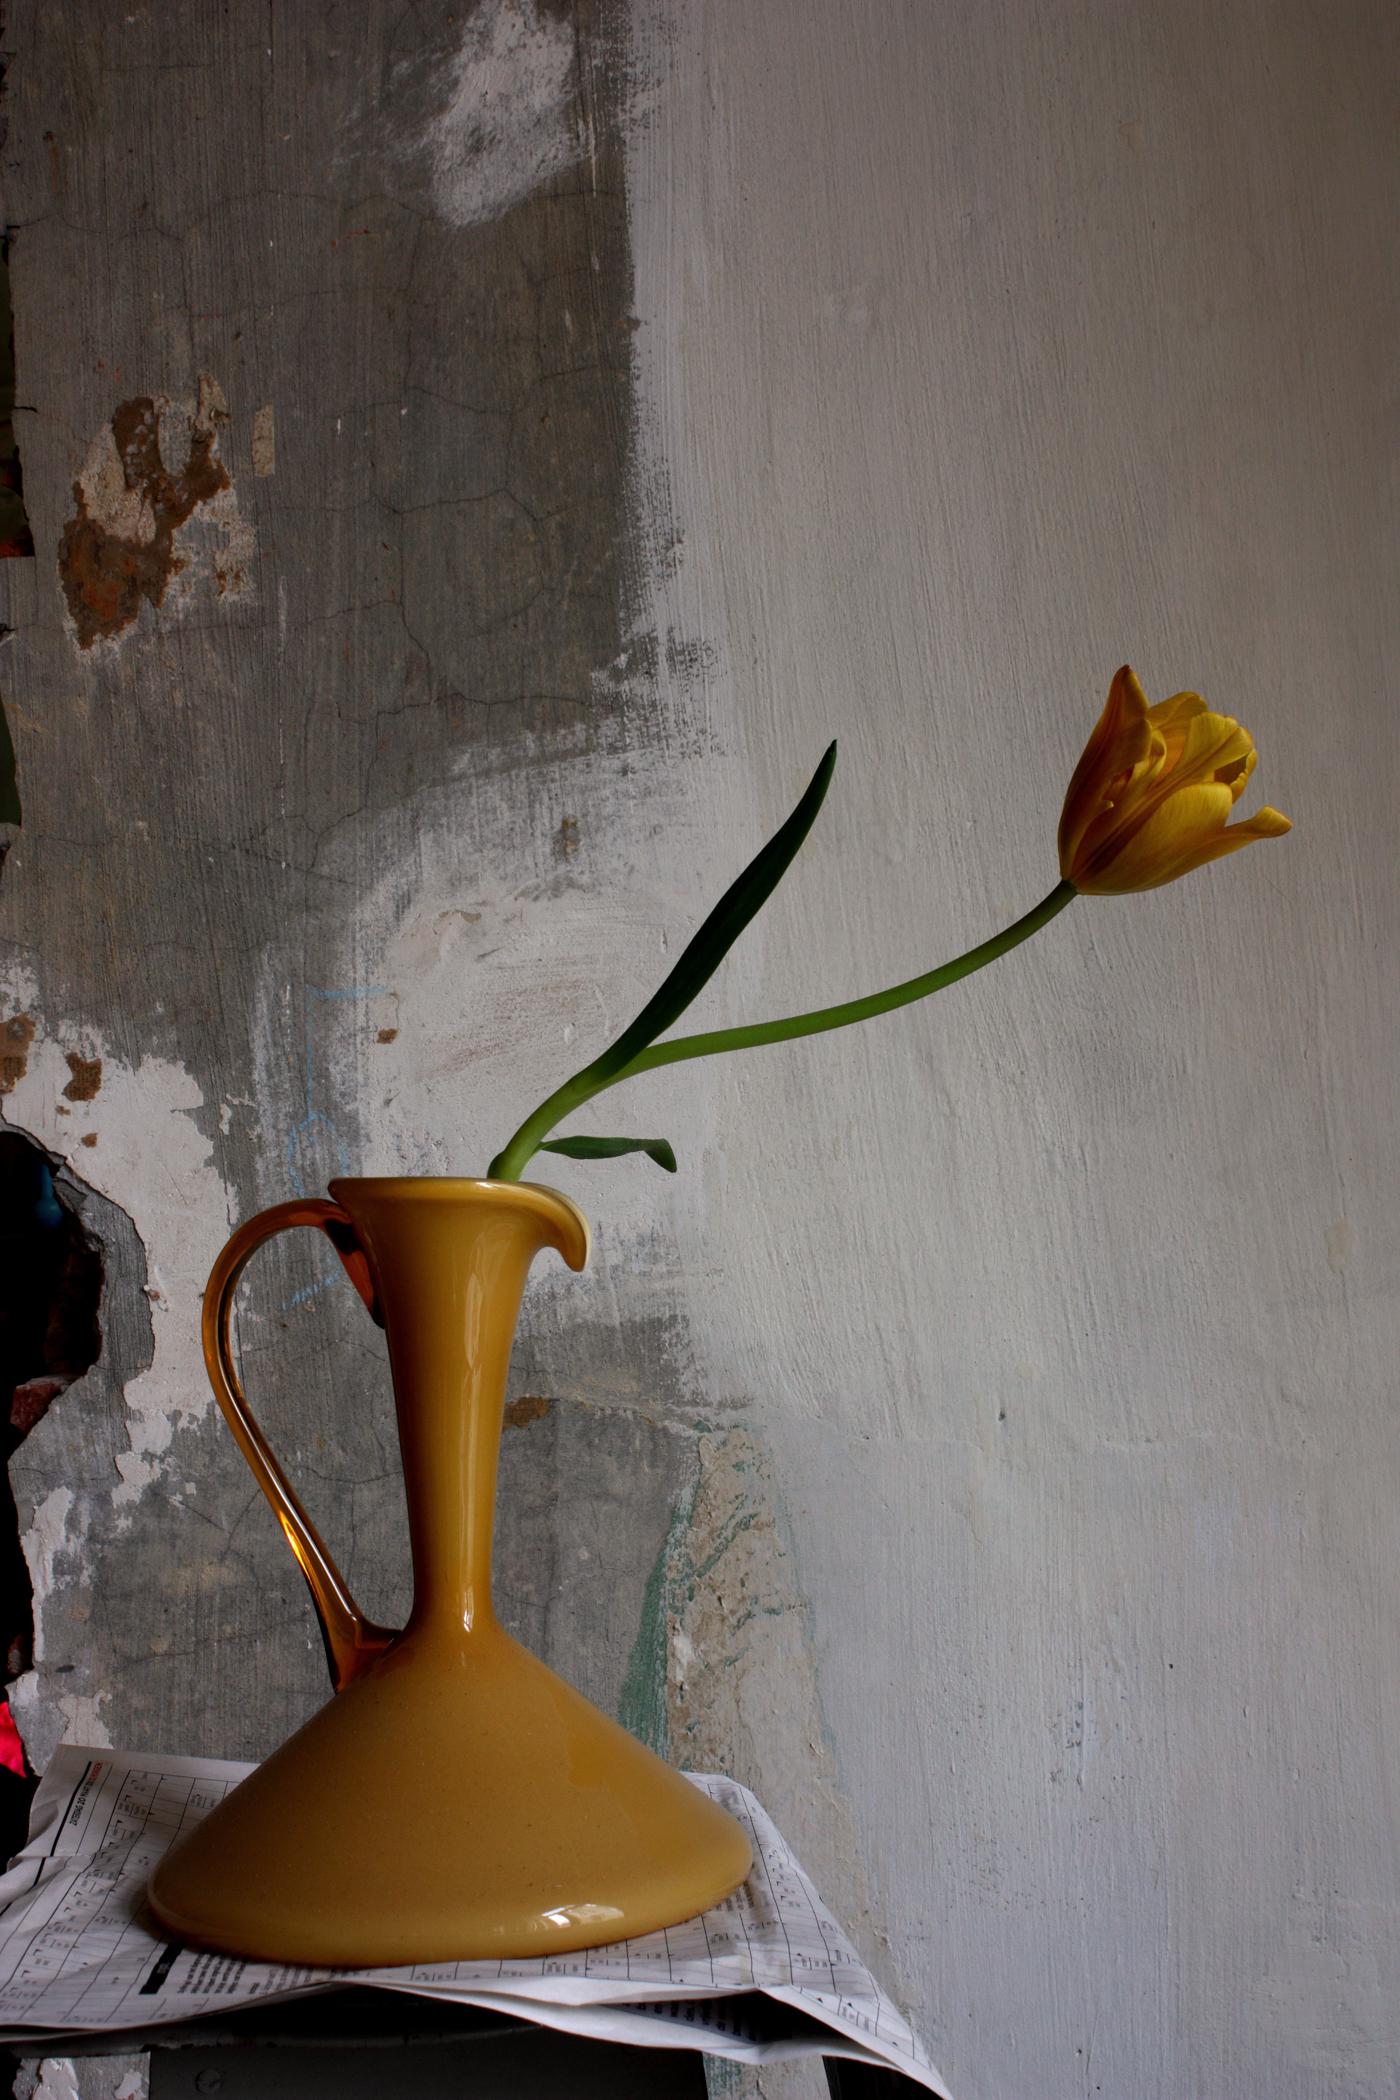 Michael James O’Brien Still-Life Photograph - Still Life with a Yellow Tulip and a Yellow Opalina Vase, Antwerp. Photograph